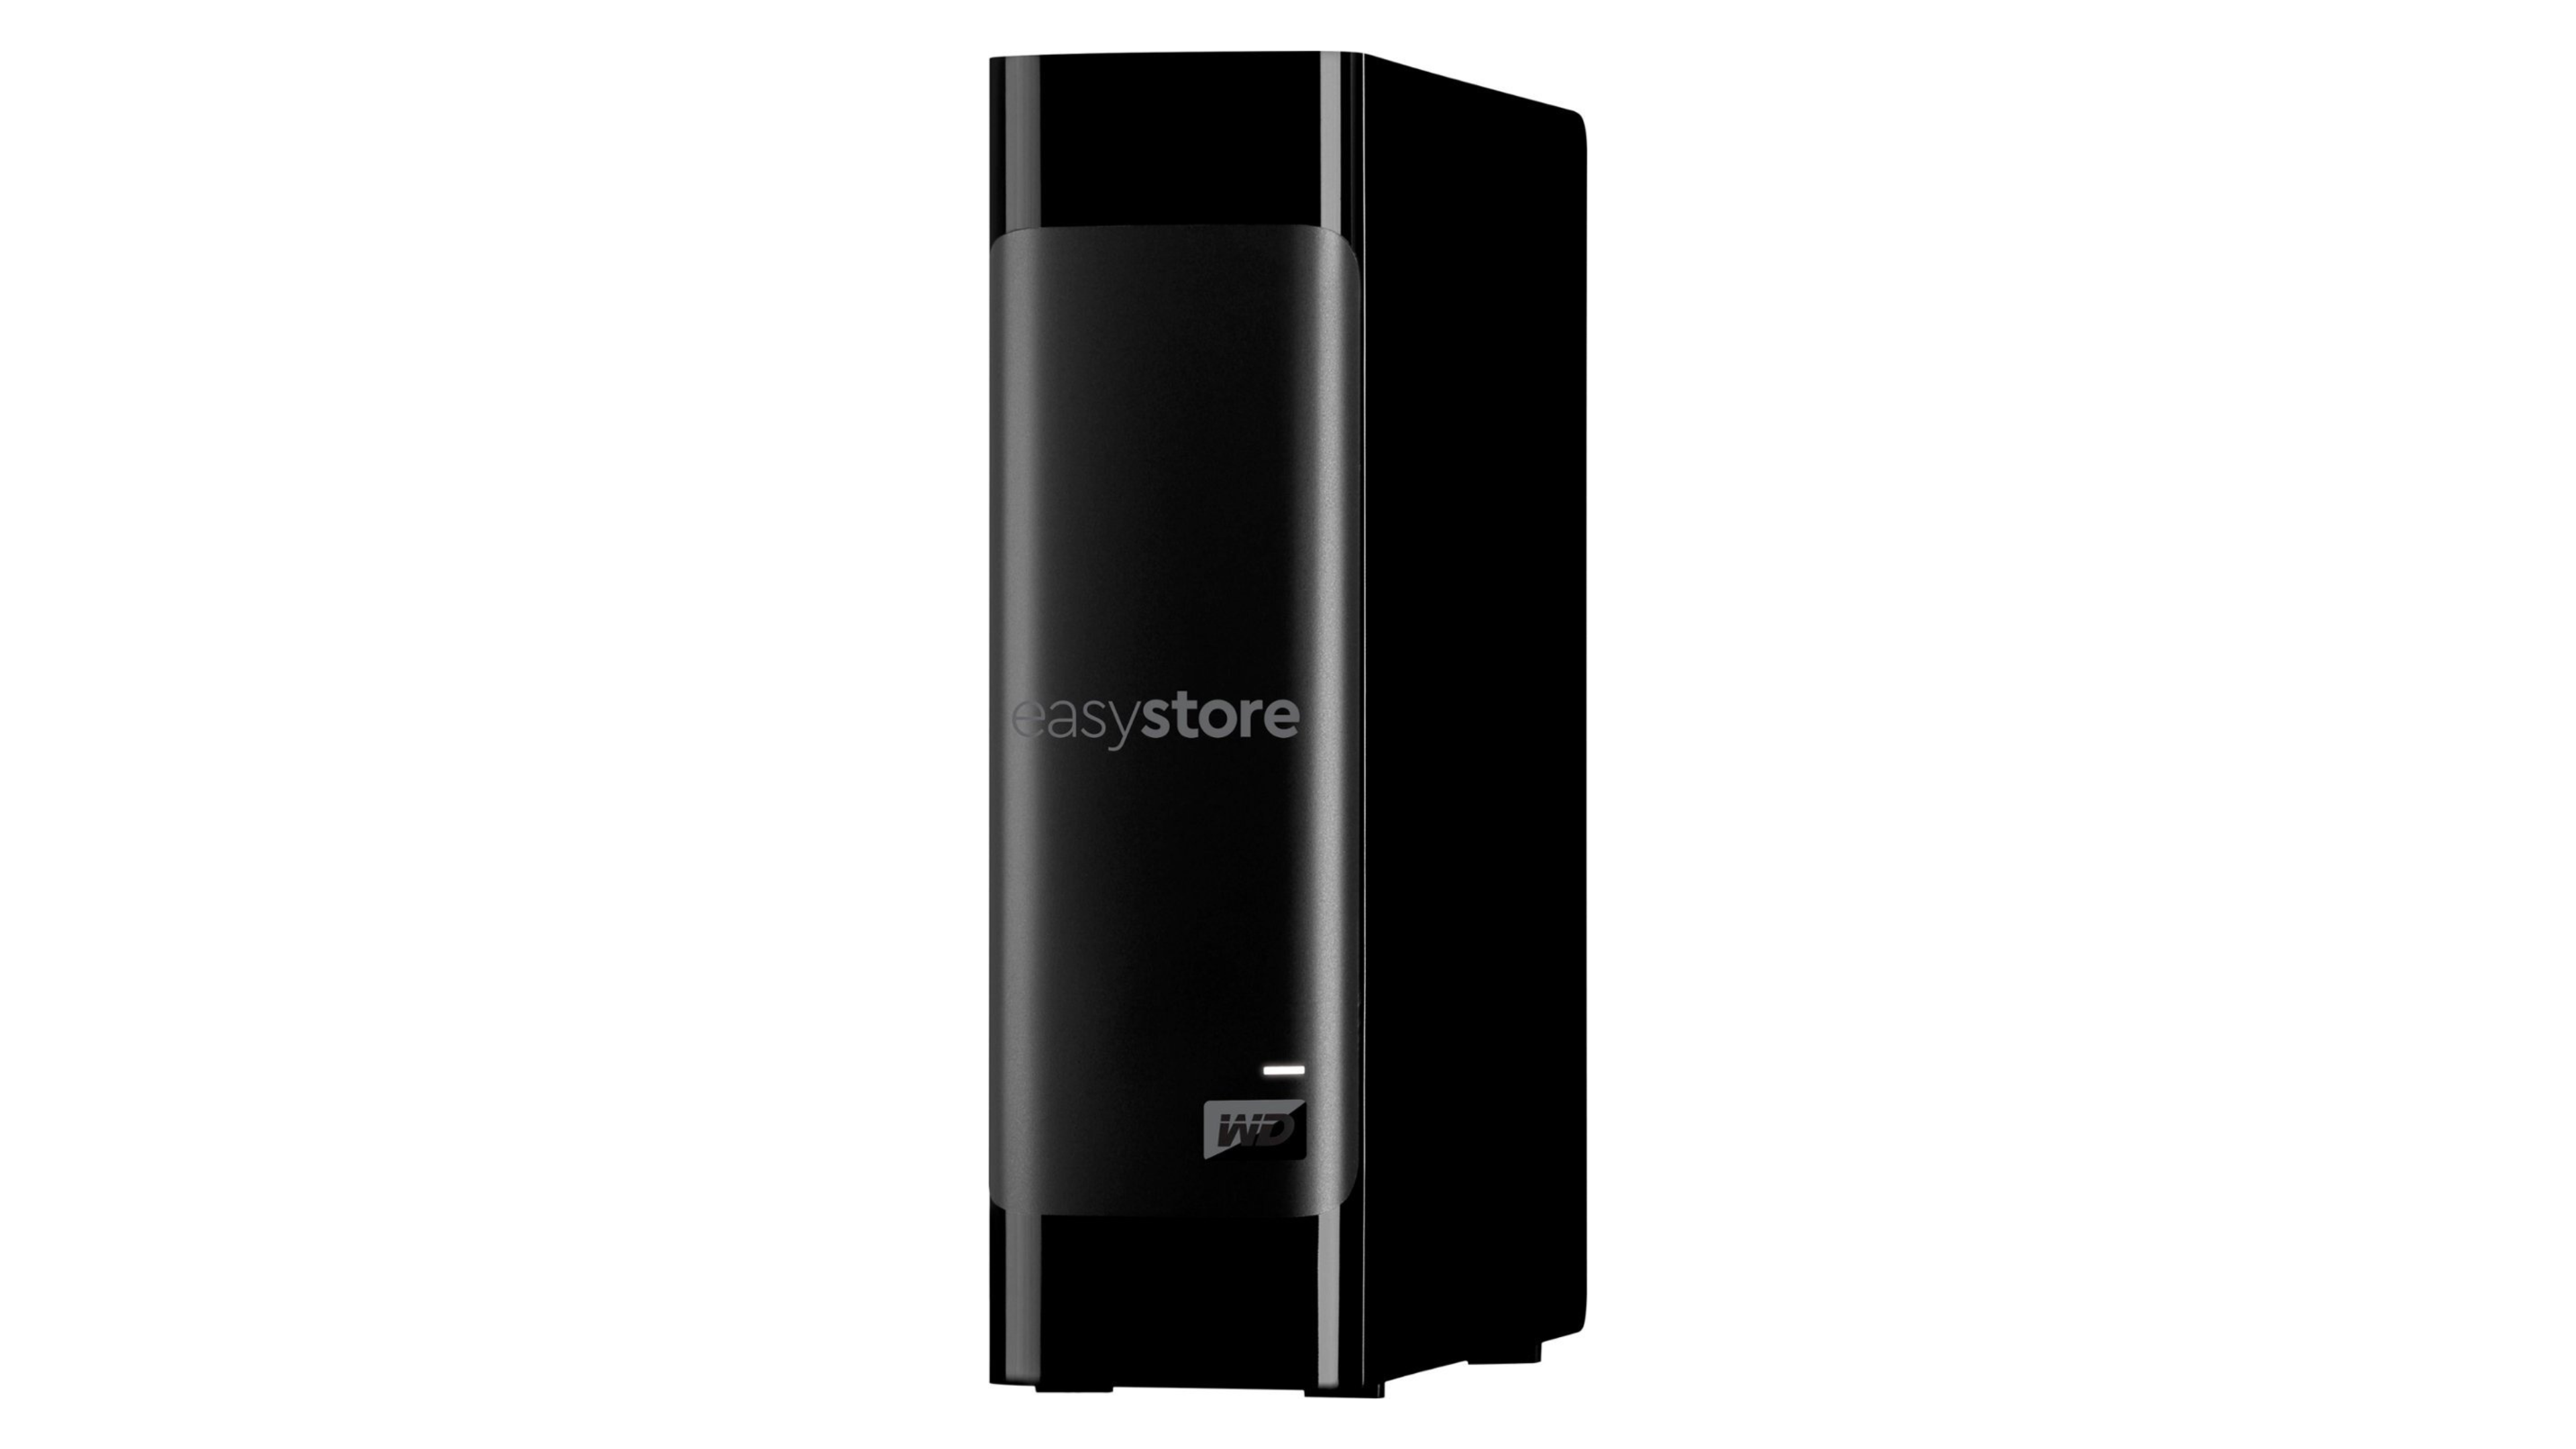 18TB WD easystore external drive 